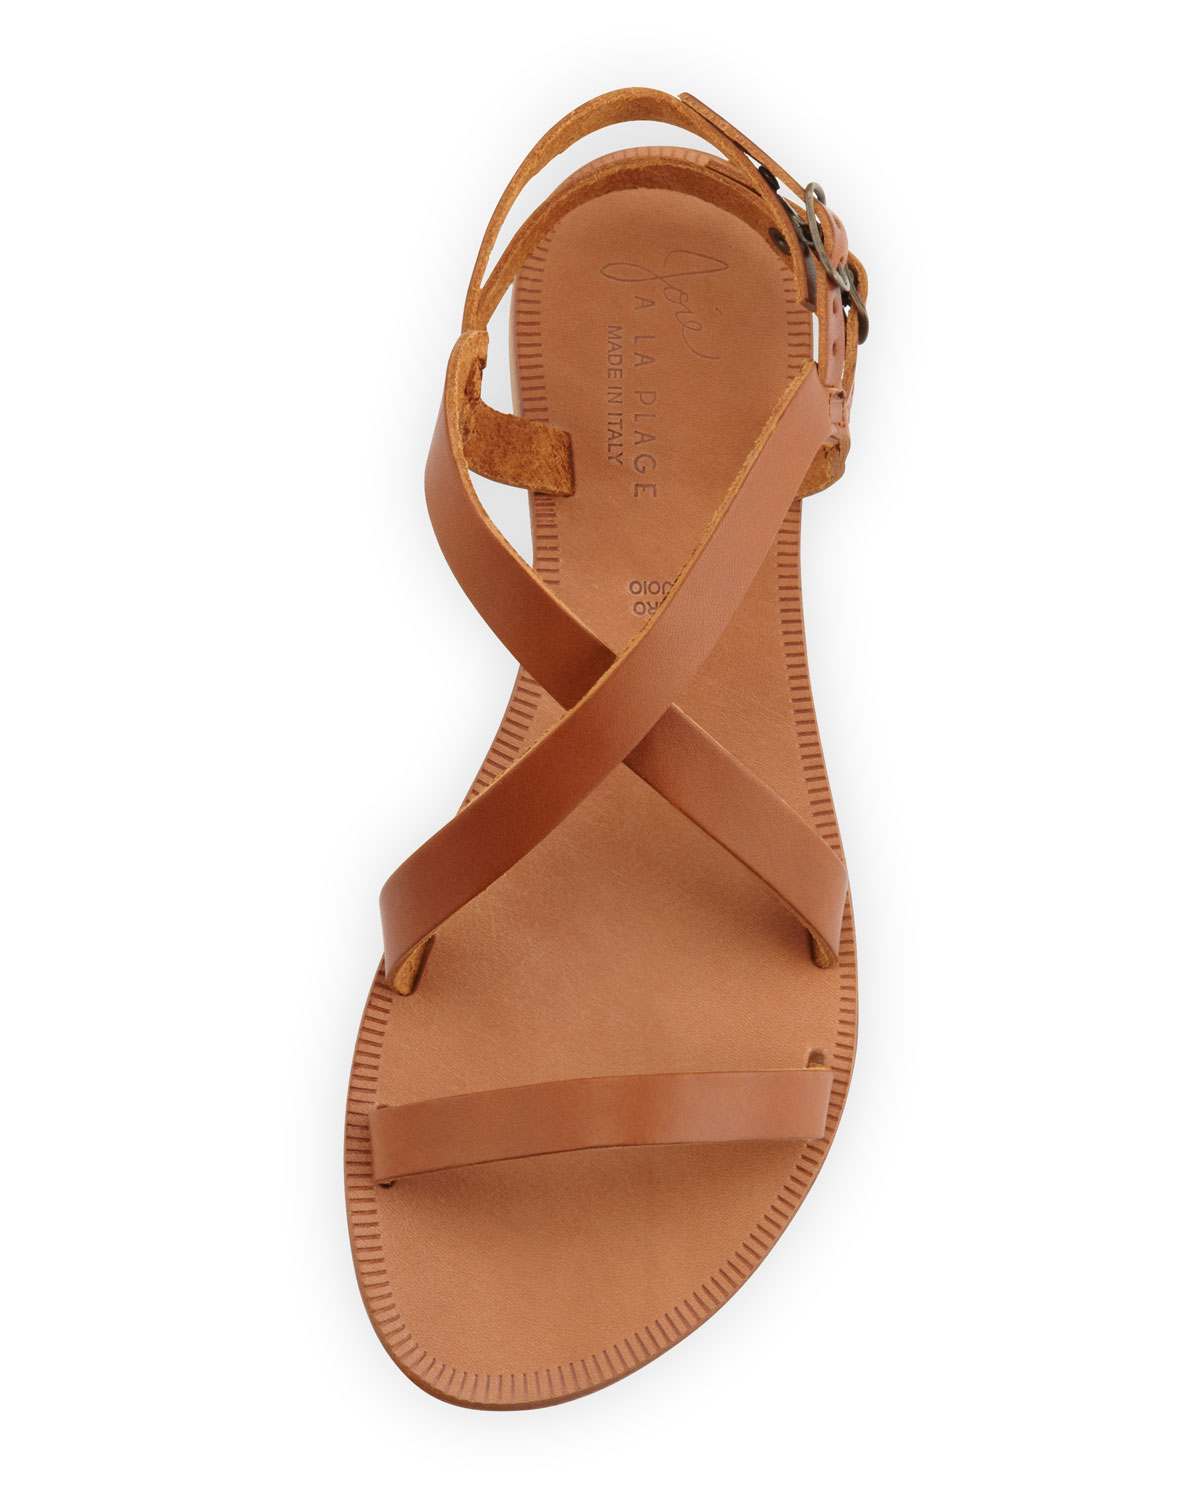 Joie Socoa Strappy Leather Sandal in Brown | Lyst